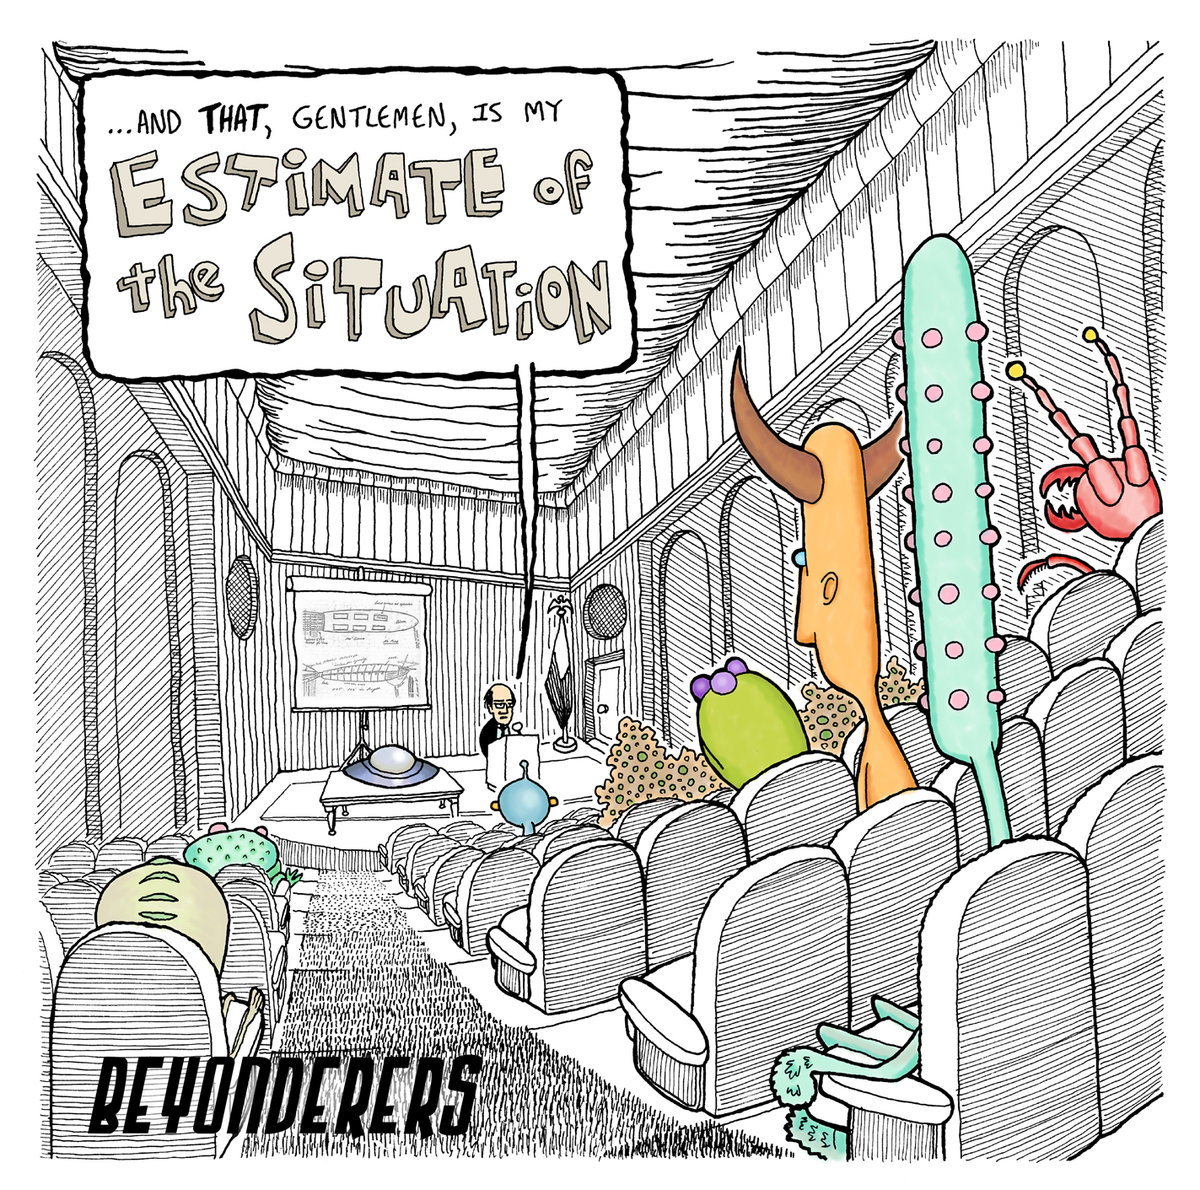 The Beyonderers - Estimate of the Situation